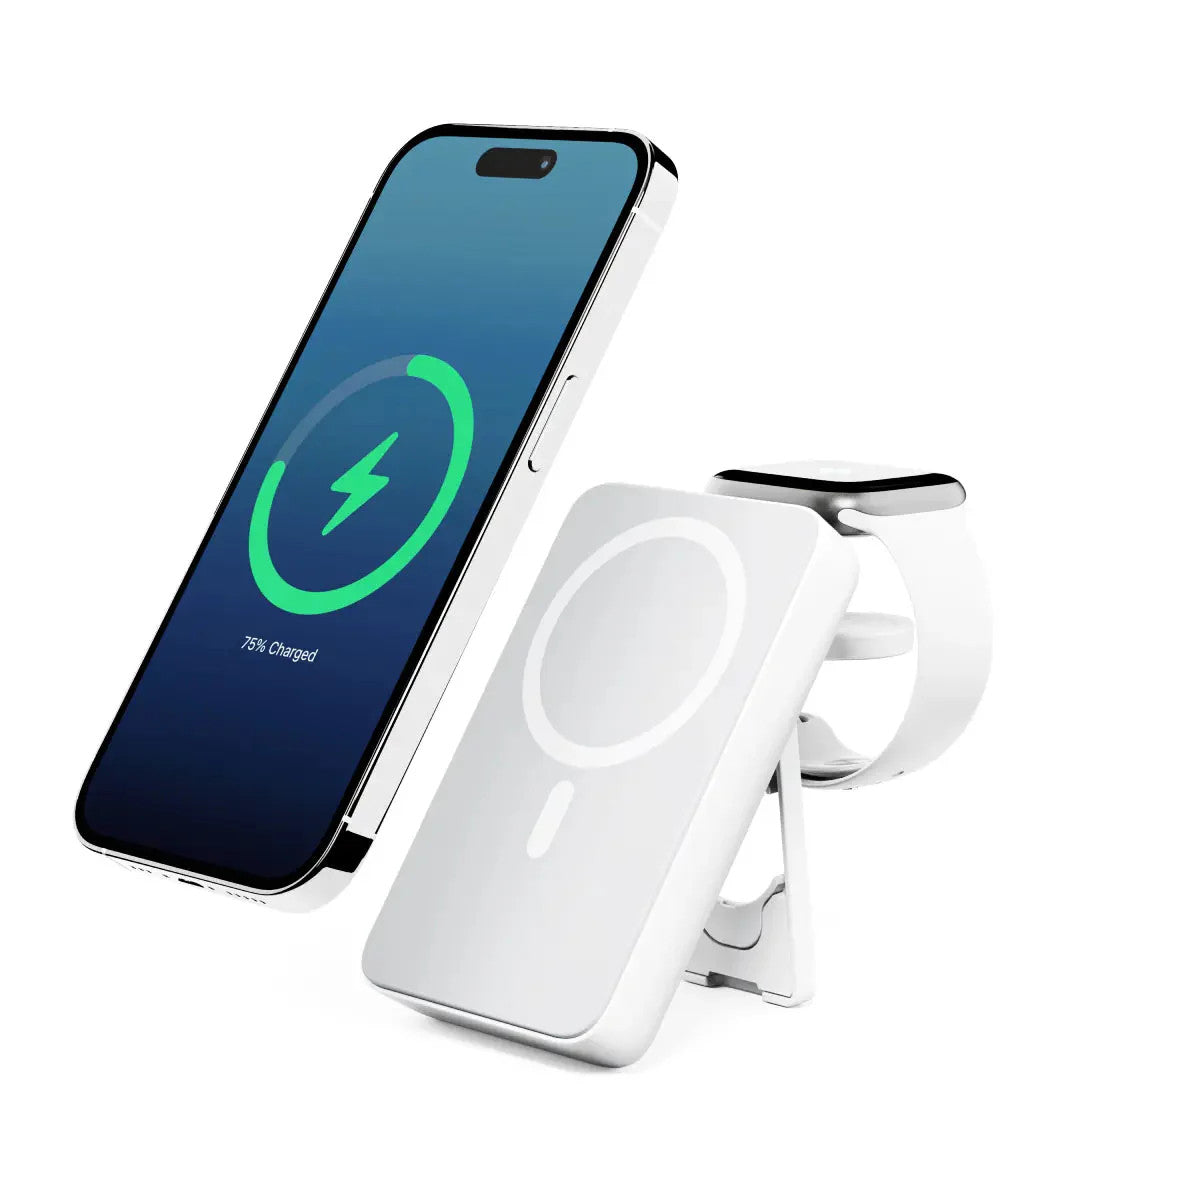 ALOGIC Lift 4-in-1 MagSafe Compatible 10,000mAh Wireless Charging Power Bank